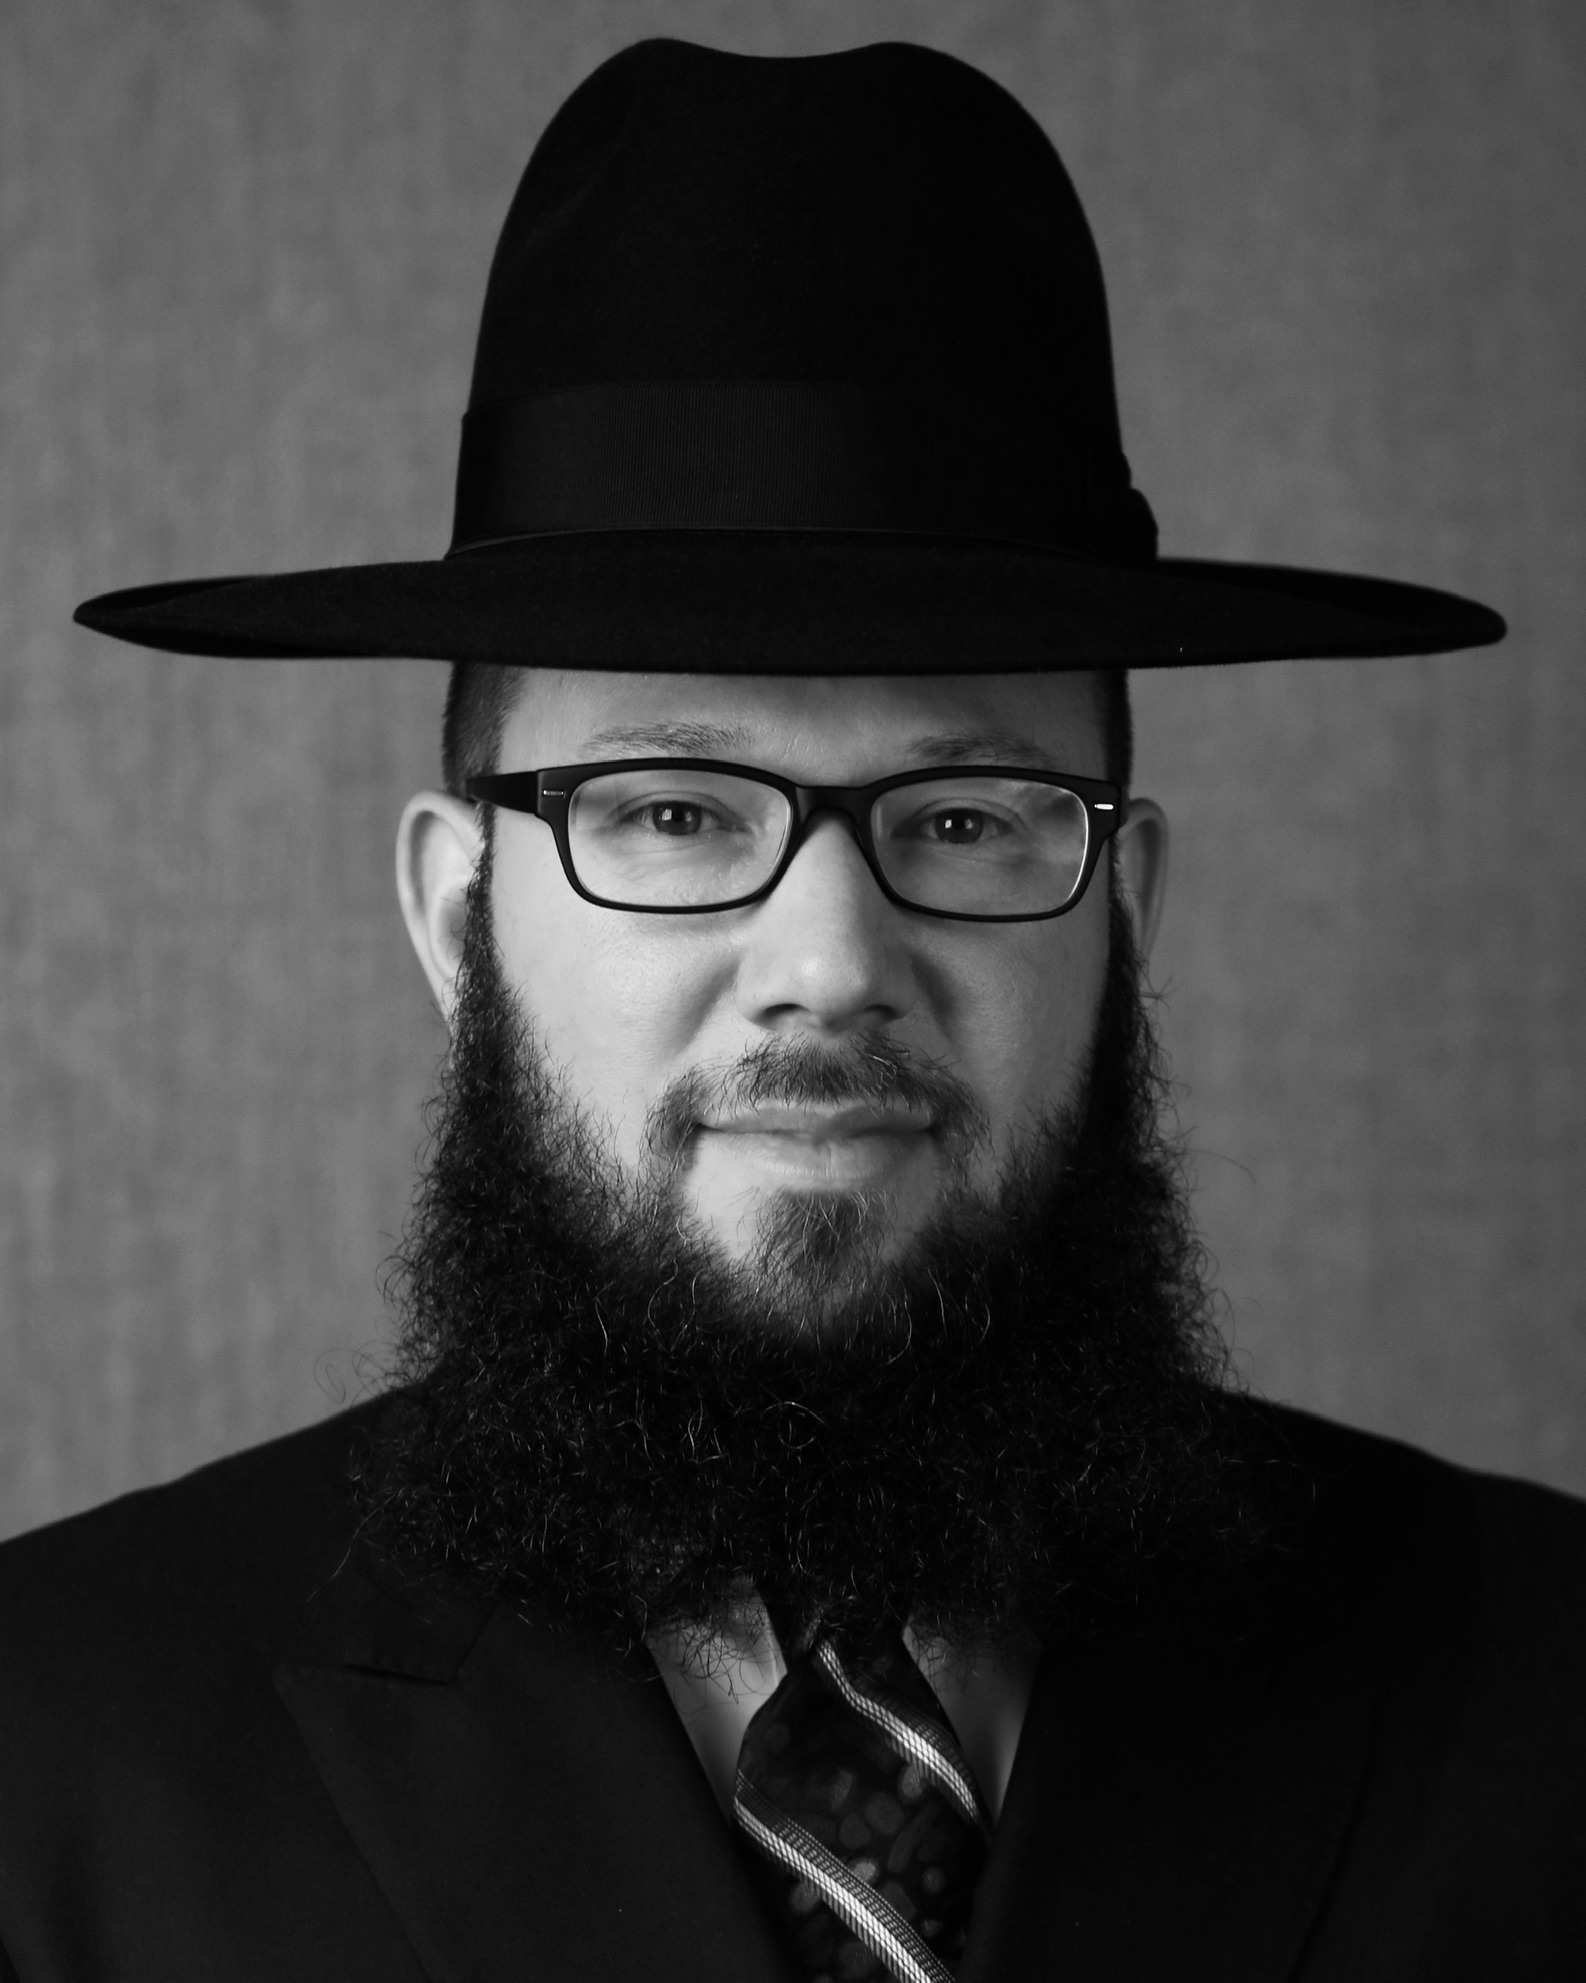 A rabbi with glasses, a beard, and a hat